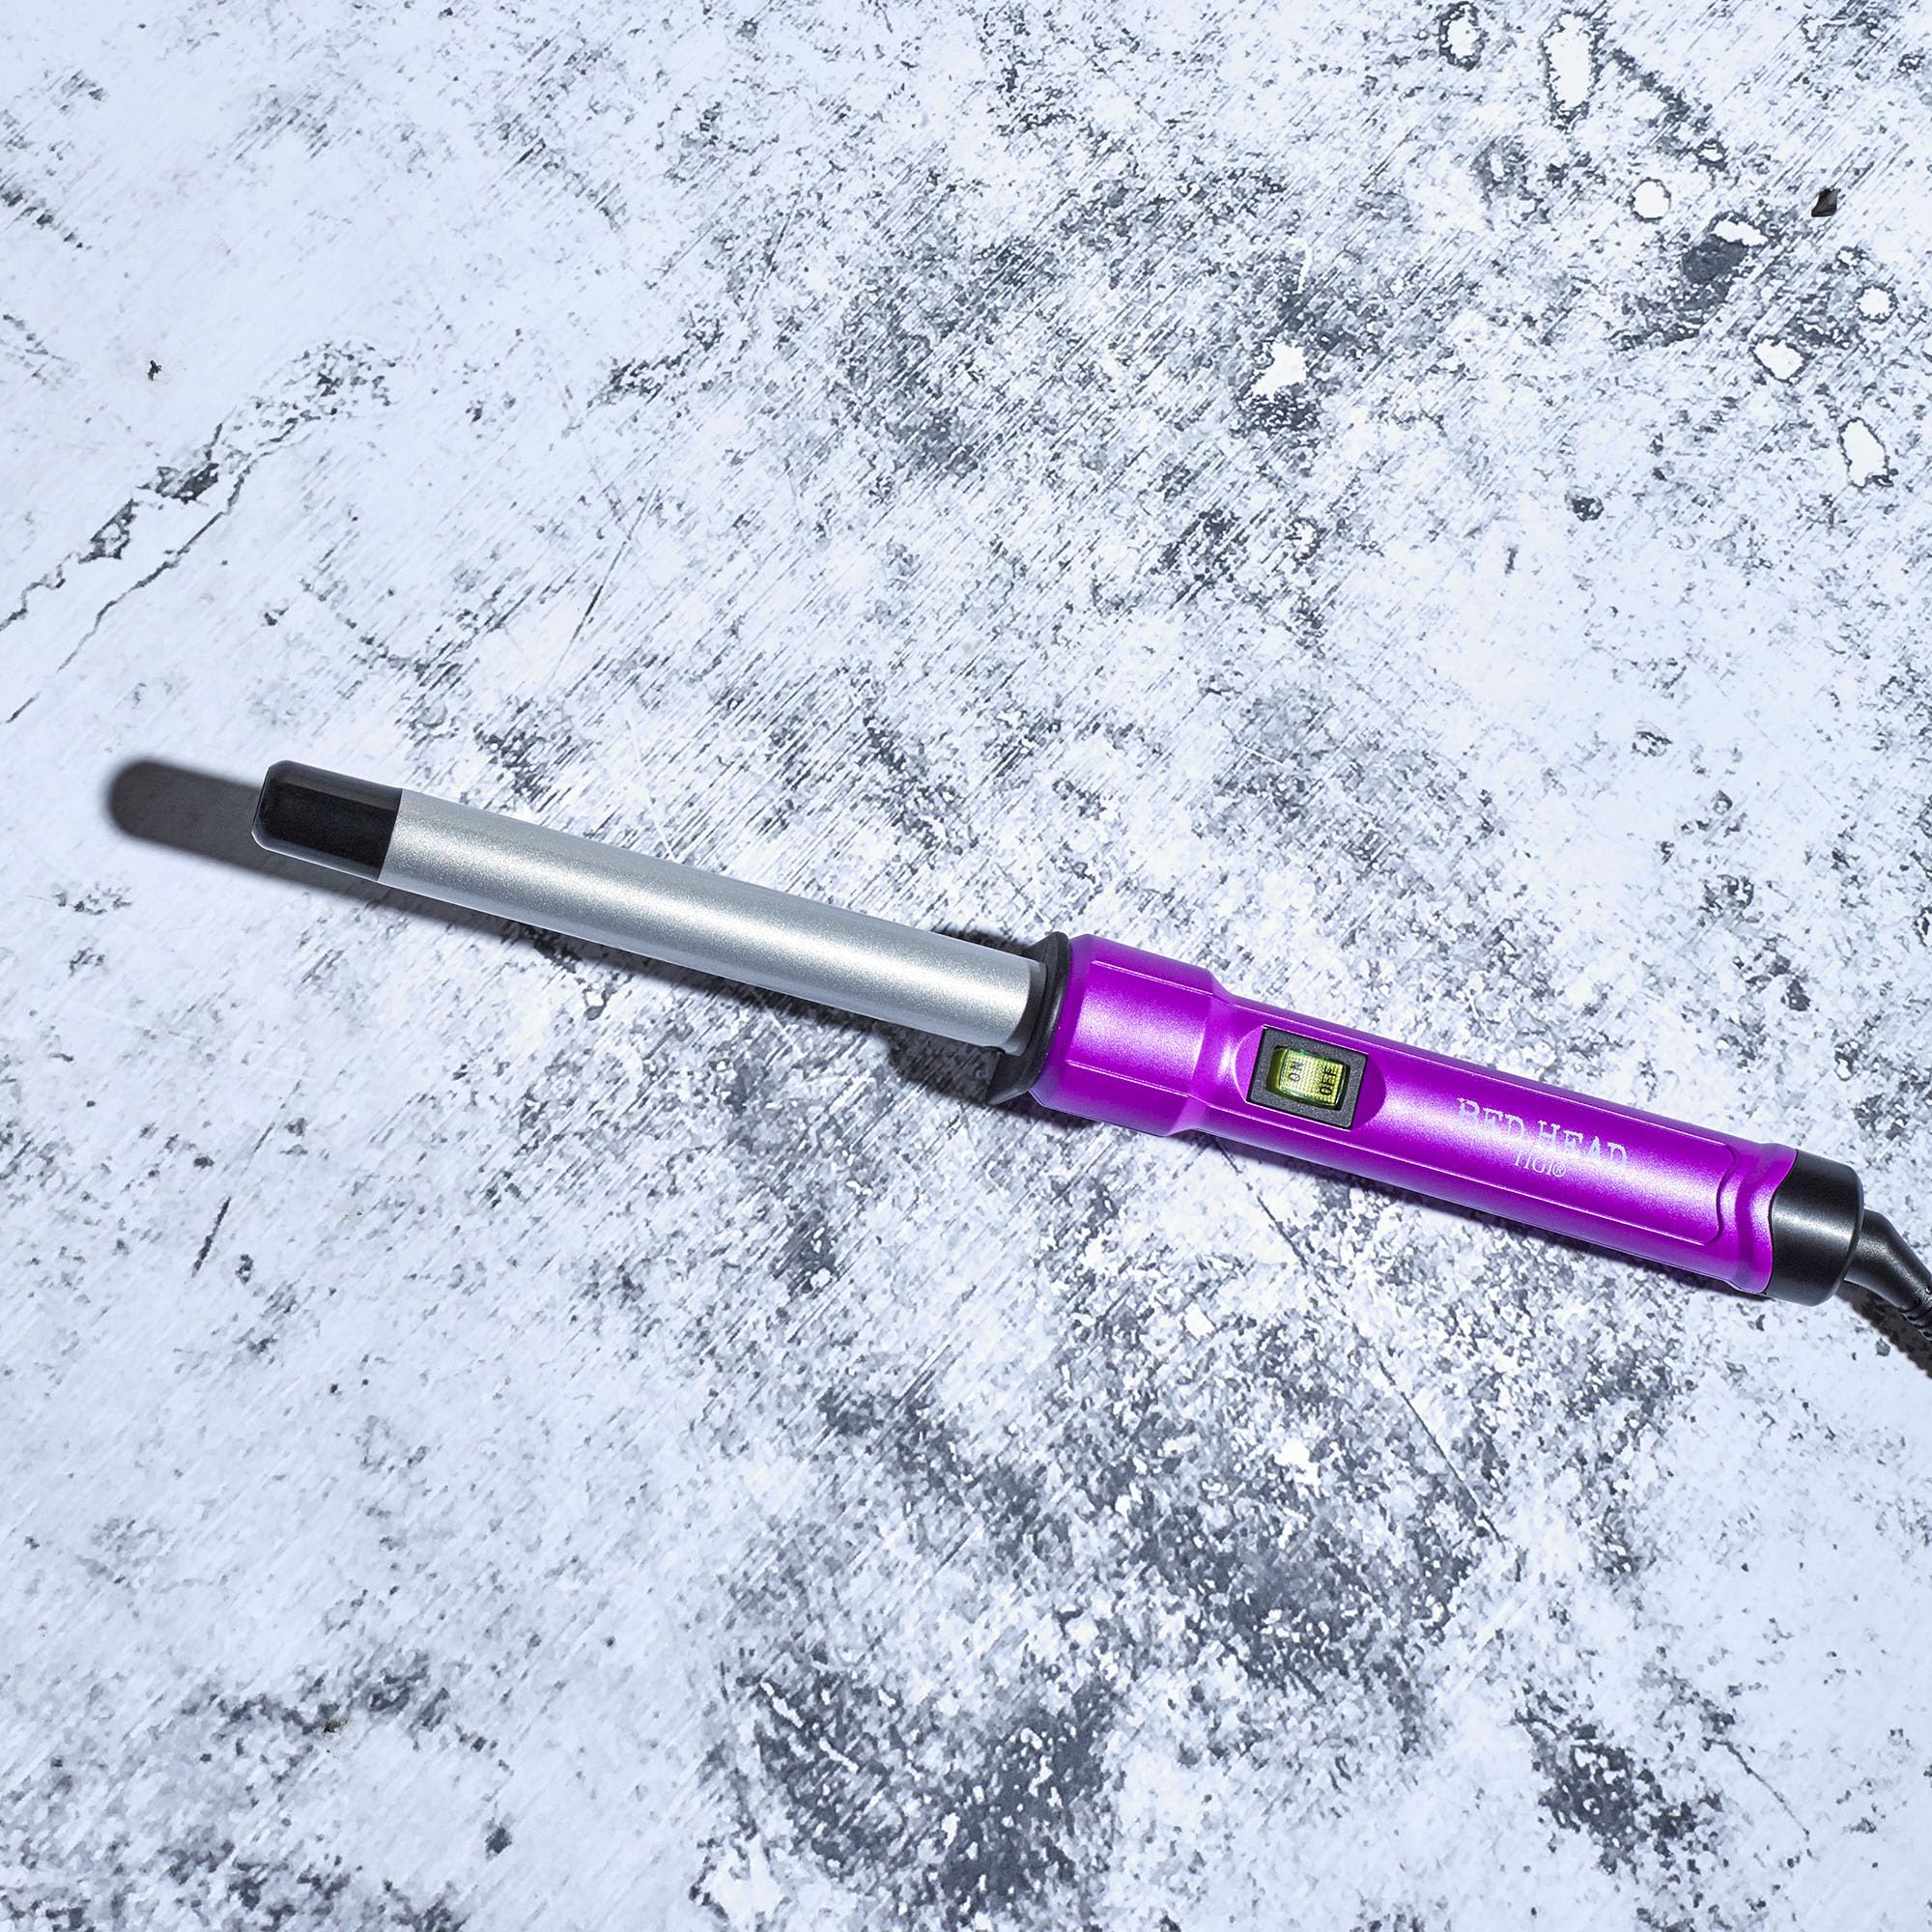 Bed Head Curlipops .75” Tourmaline Ceramic Styling Iron | Clamp-Free Curling Wand | for Natural-Looking Curls & Short Hair (3/4 Inch)